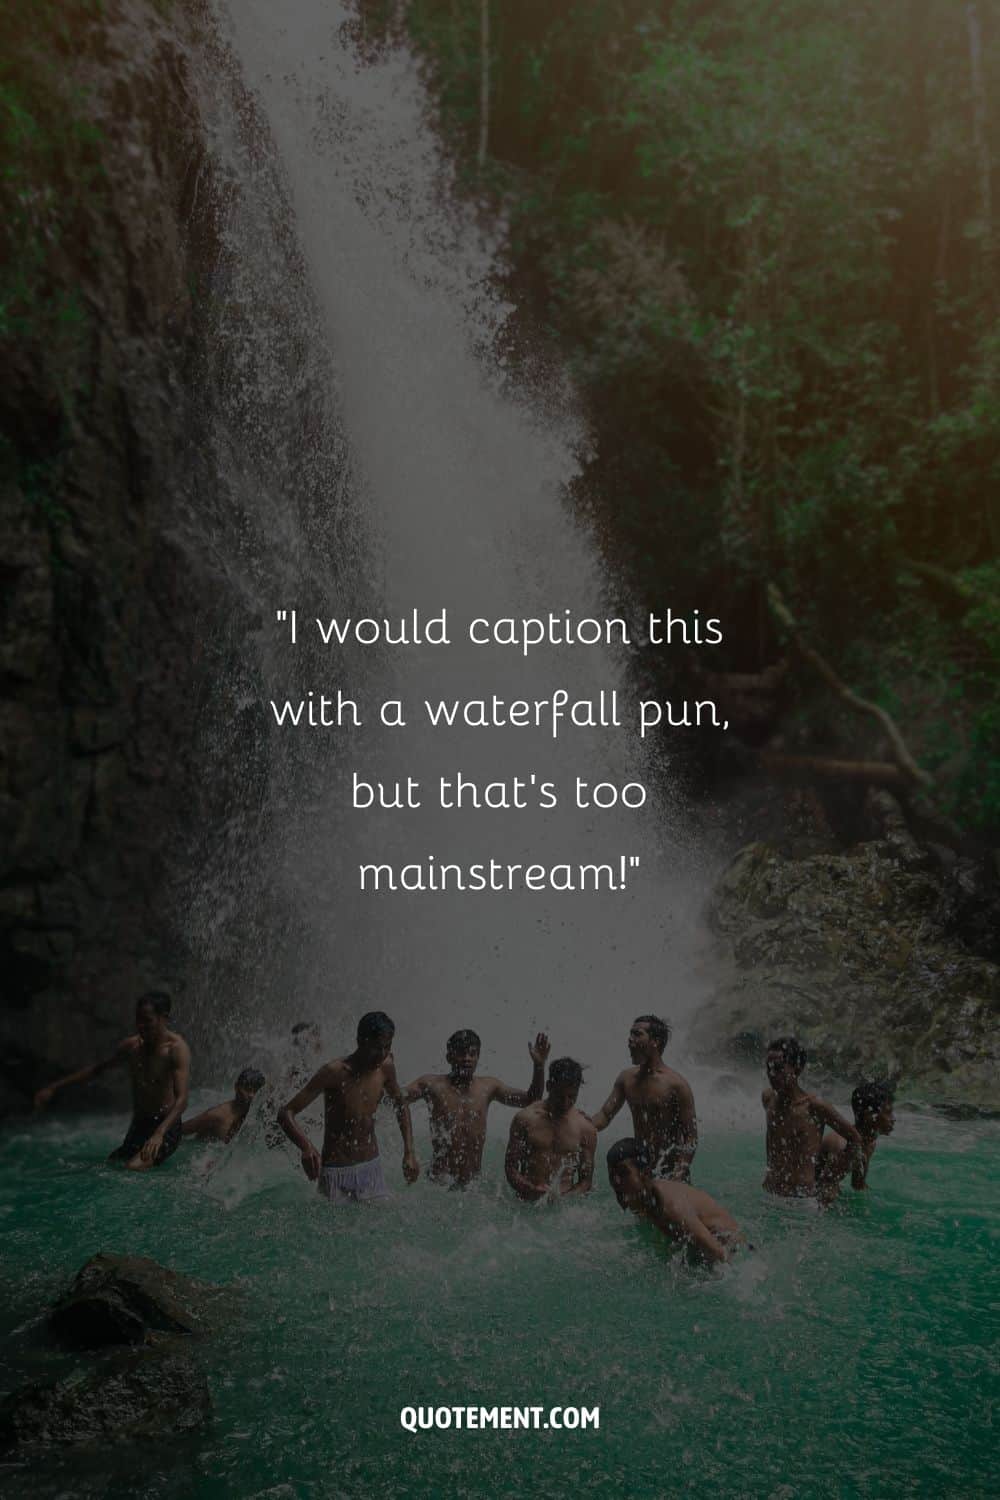 Funny quote including a waterfall pun, and a group of boys by the waterfall in the background
